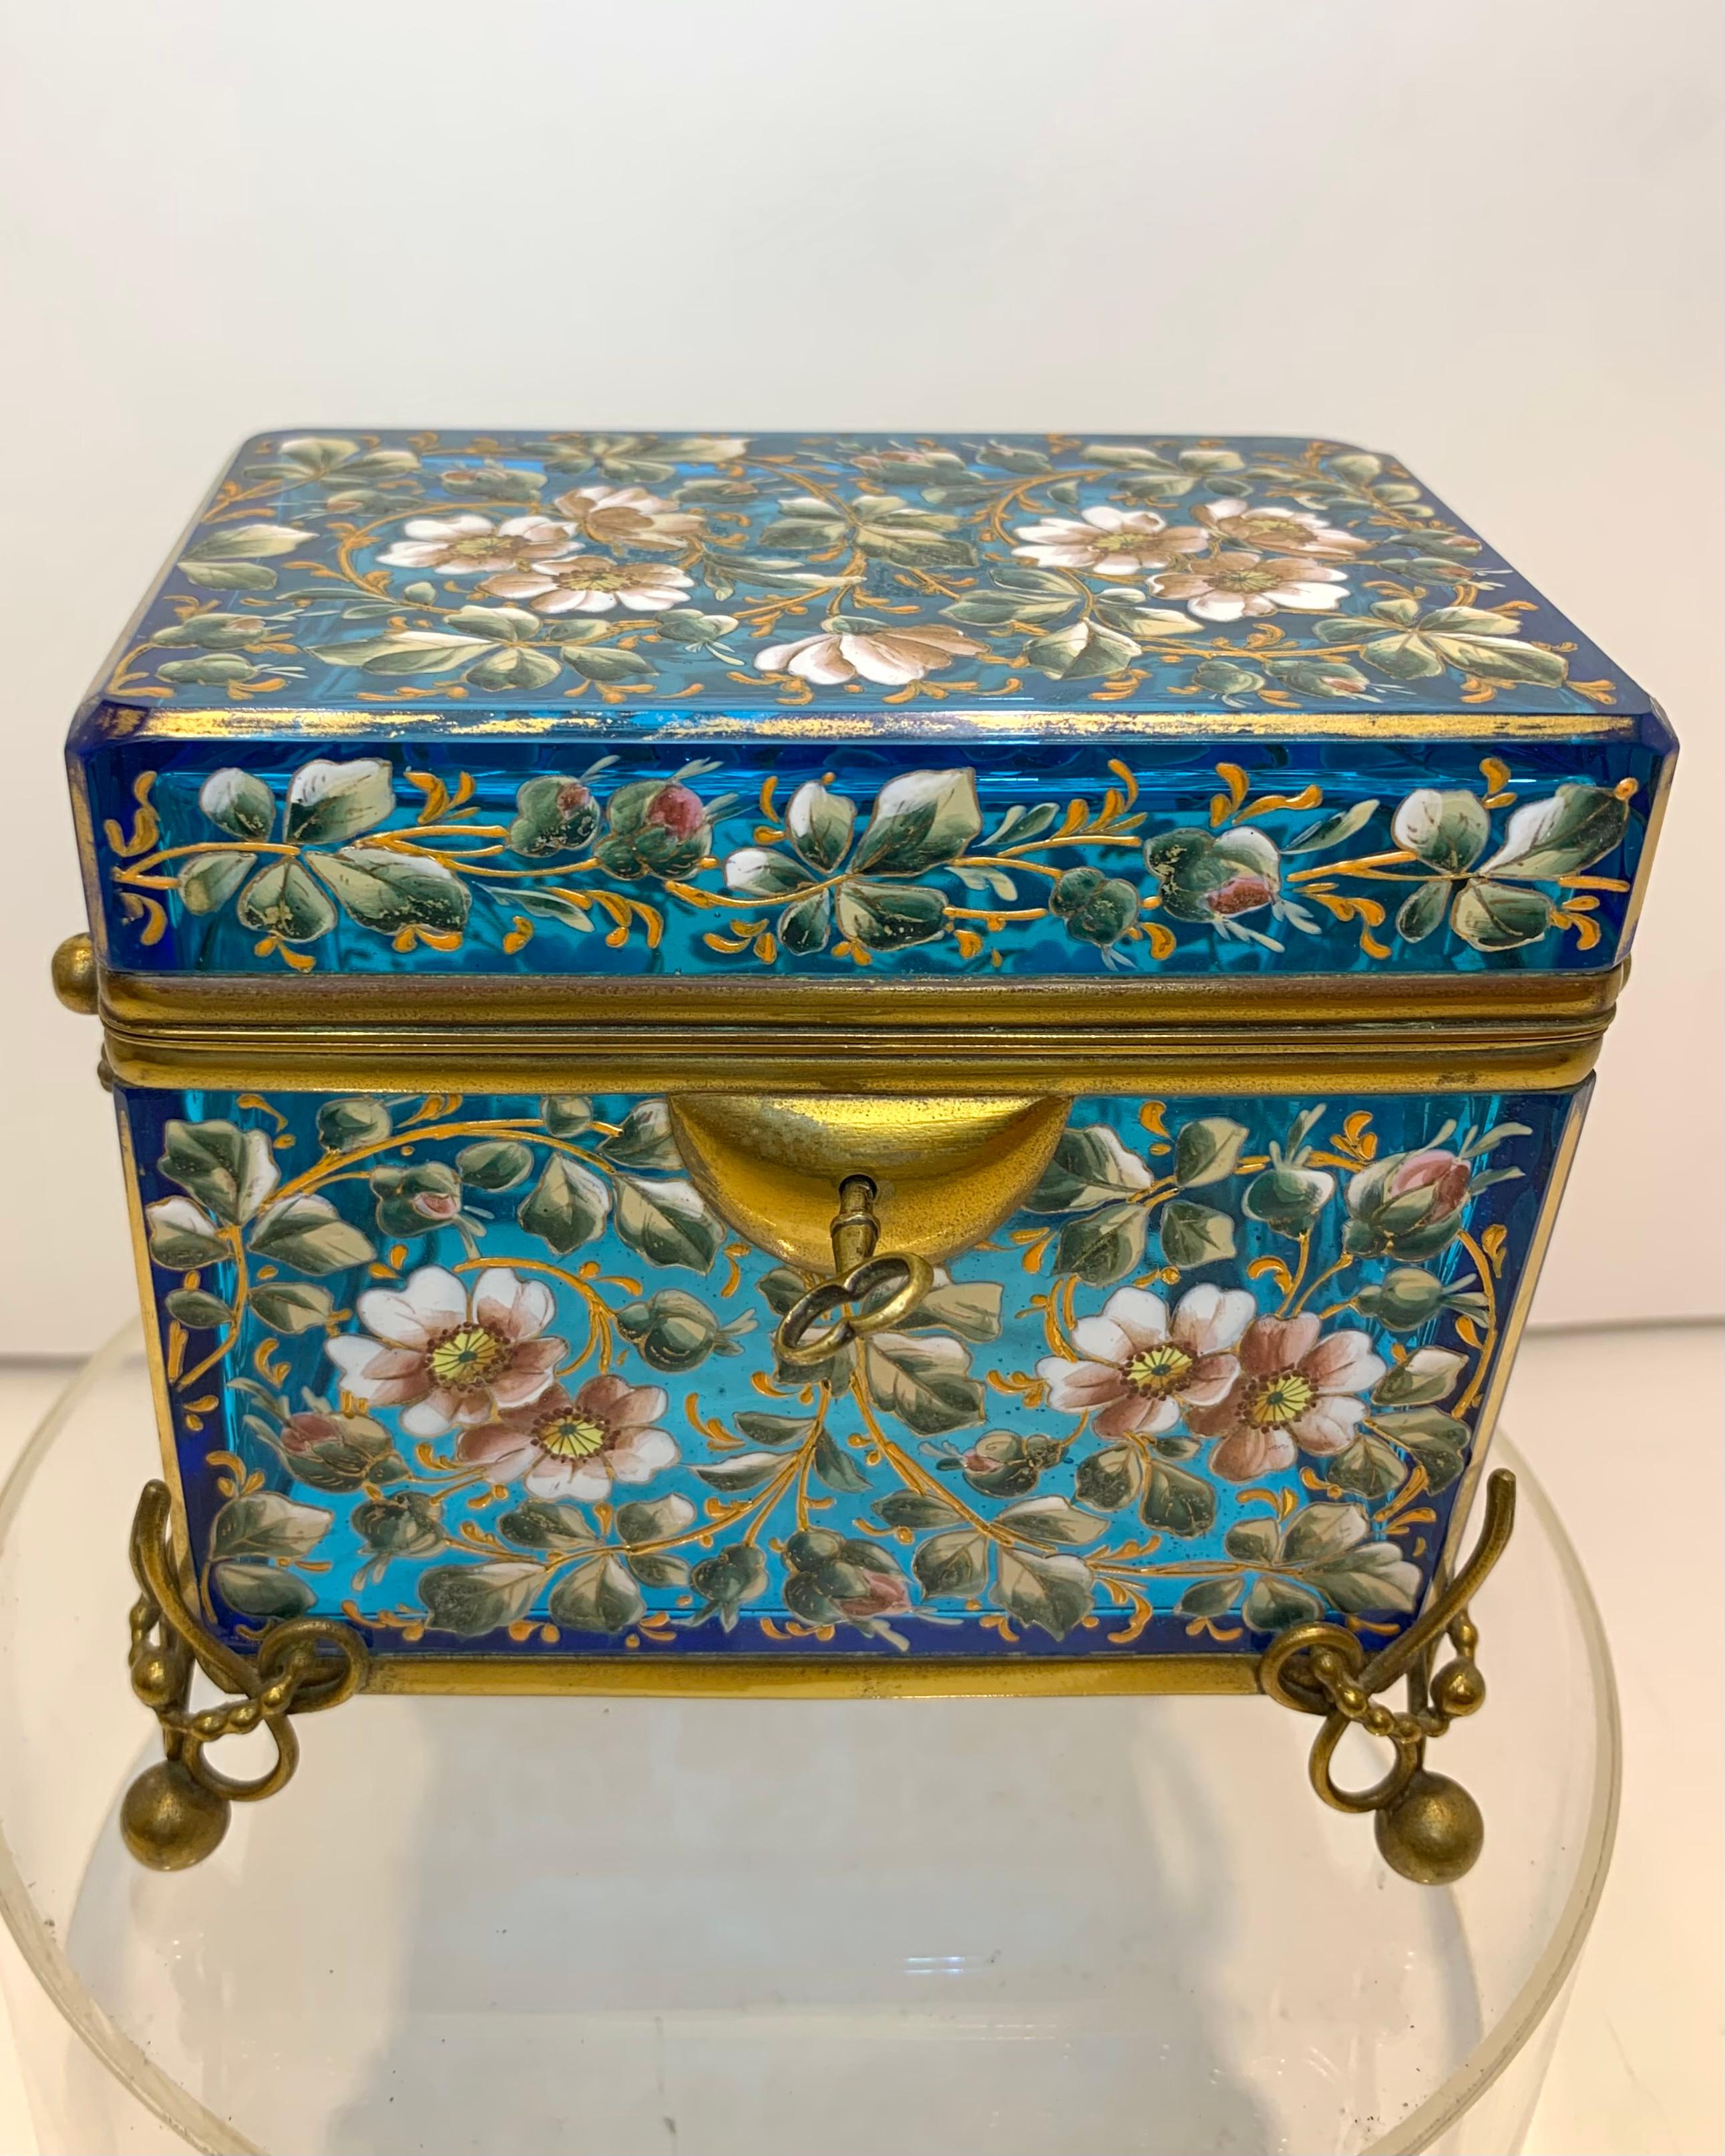 Fine Moser Casket Jewelry Box with Hinged Bronze Mounts

Standing on Dore Bronze Feet and Matching Swinging Handles

Lid and Base are Both Framed in Bronze

Generously Enameled all Around with Colorful Sprigs, Flowers and Leaves

Original